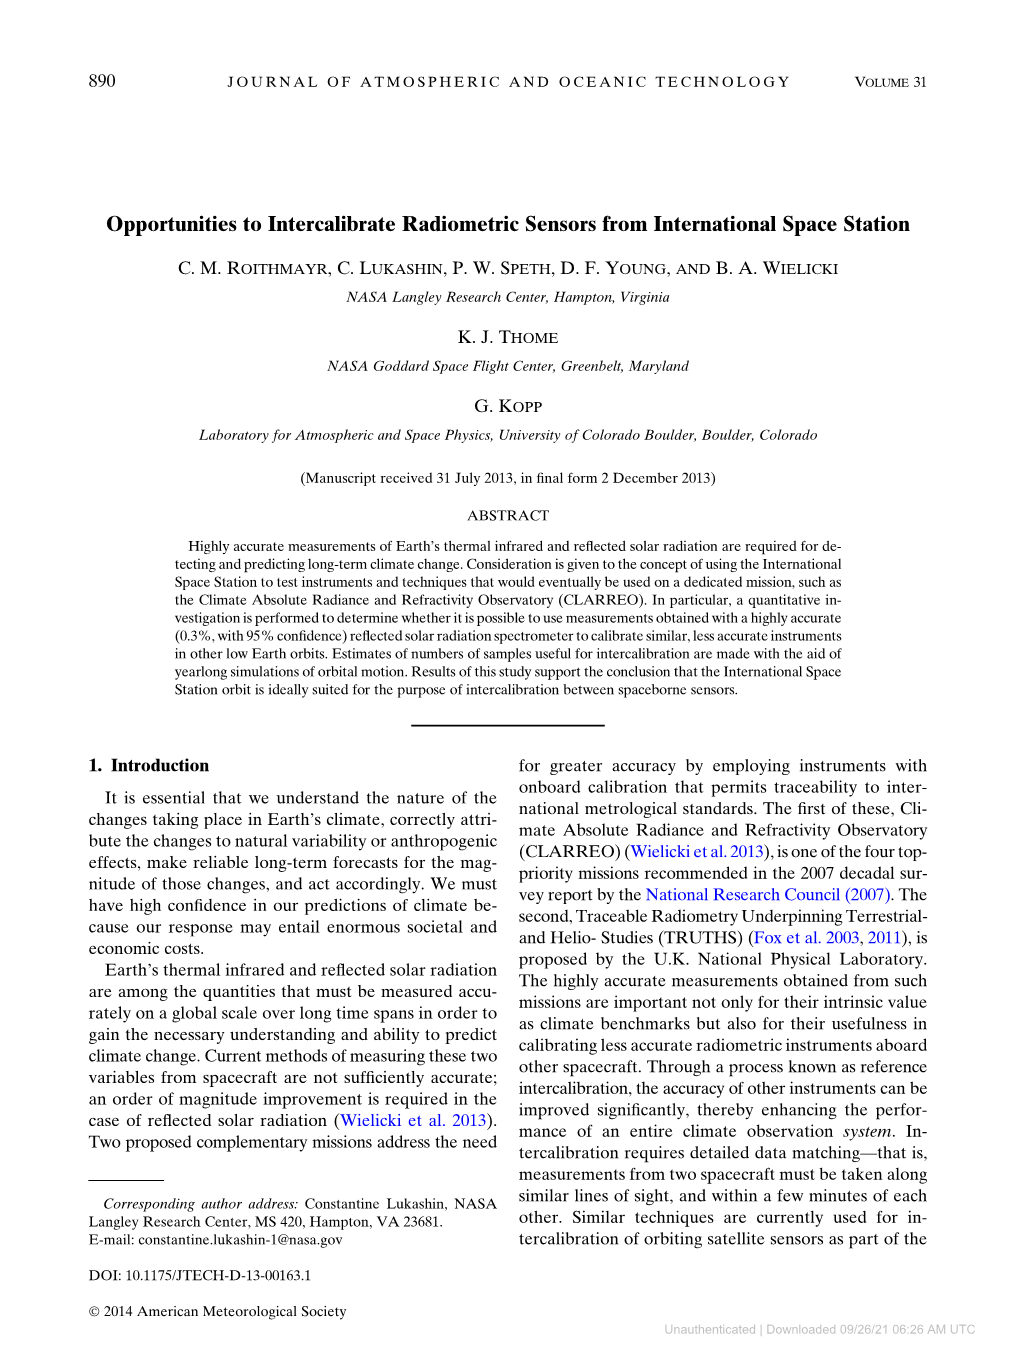 Opportunities to Intercalibrate Radiometric Sensors from International Space Station